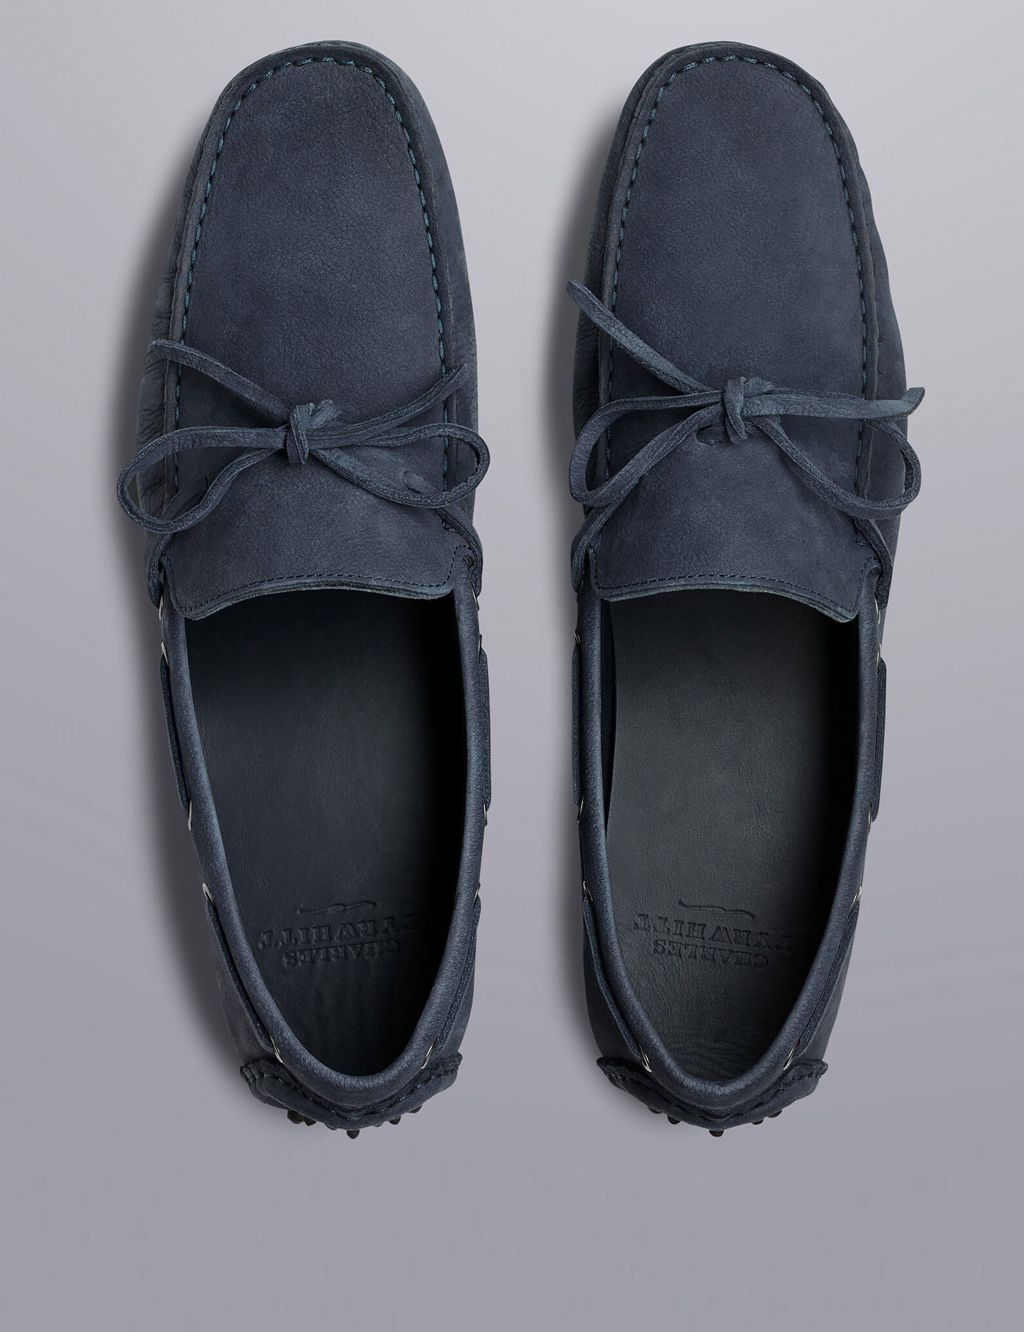 Suede Slip On Driving Loafers image 2